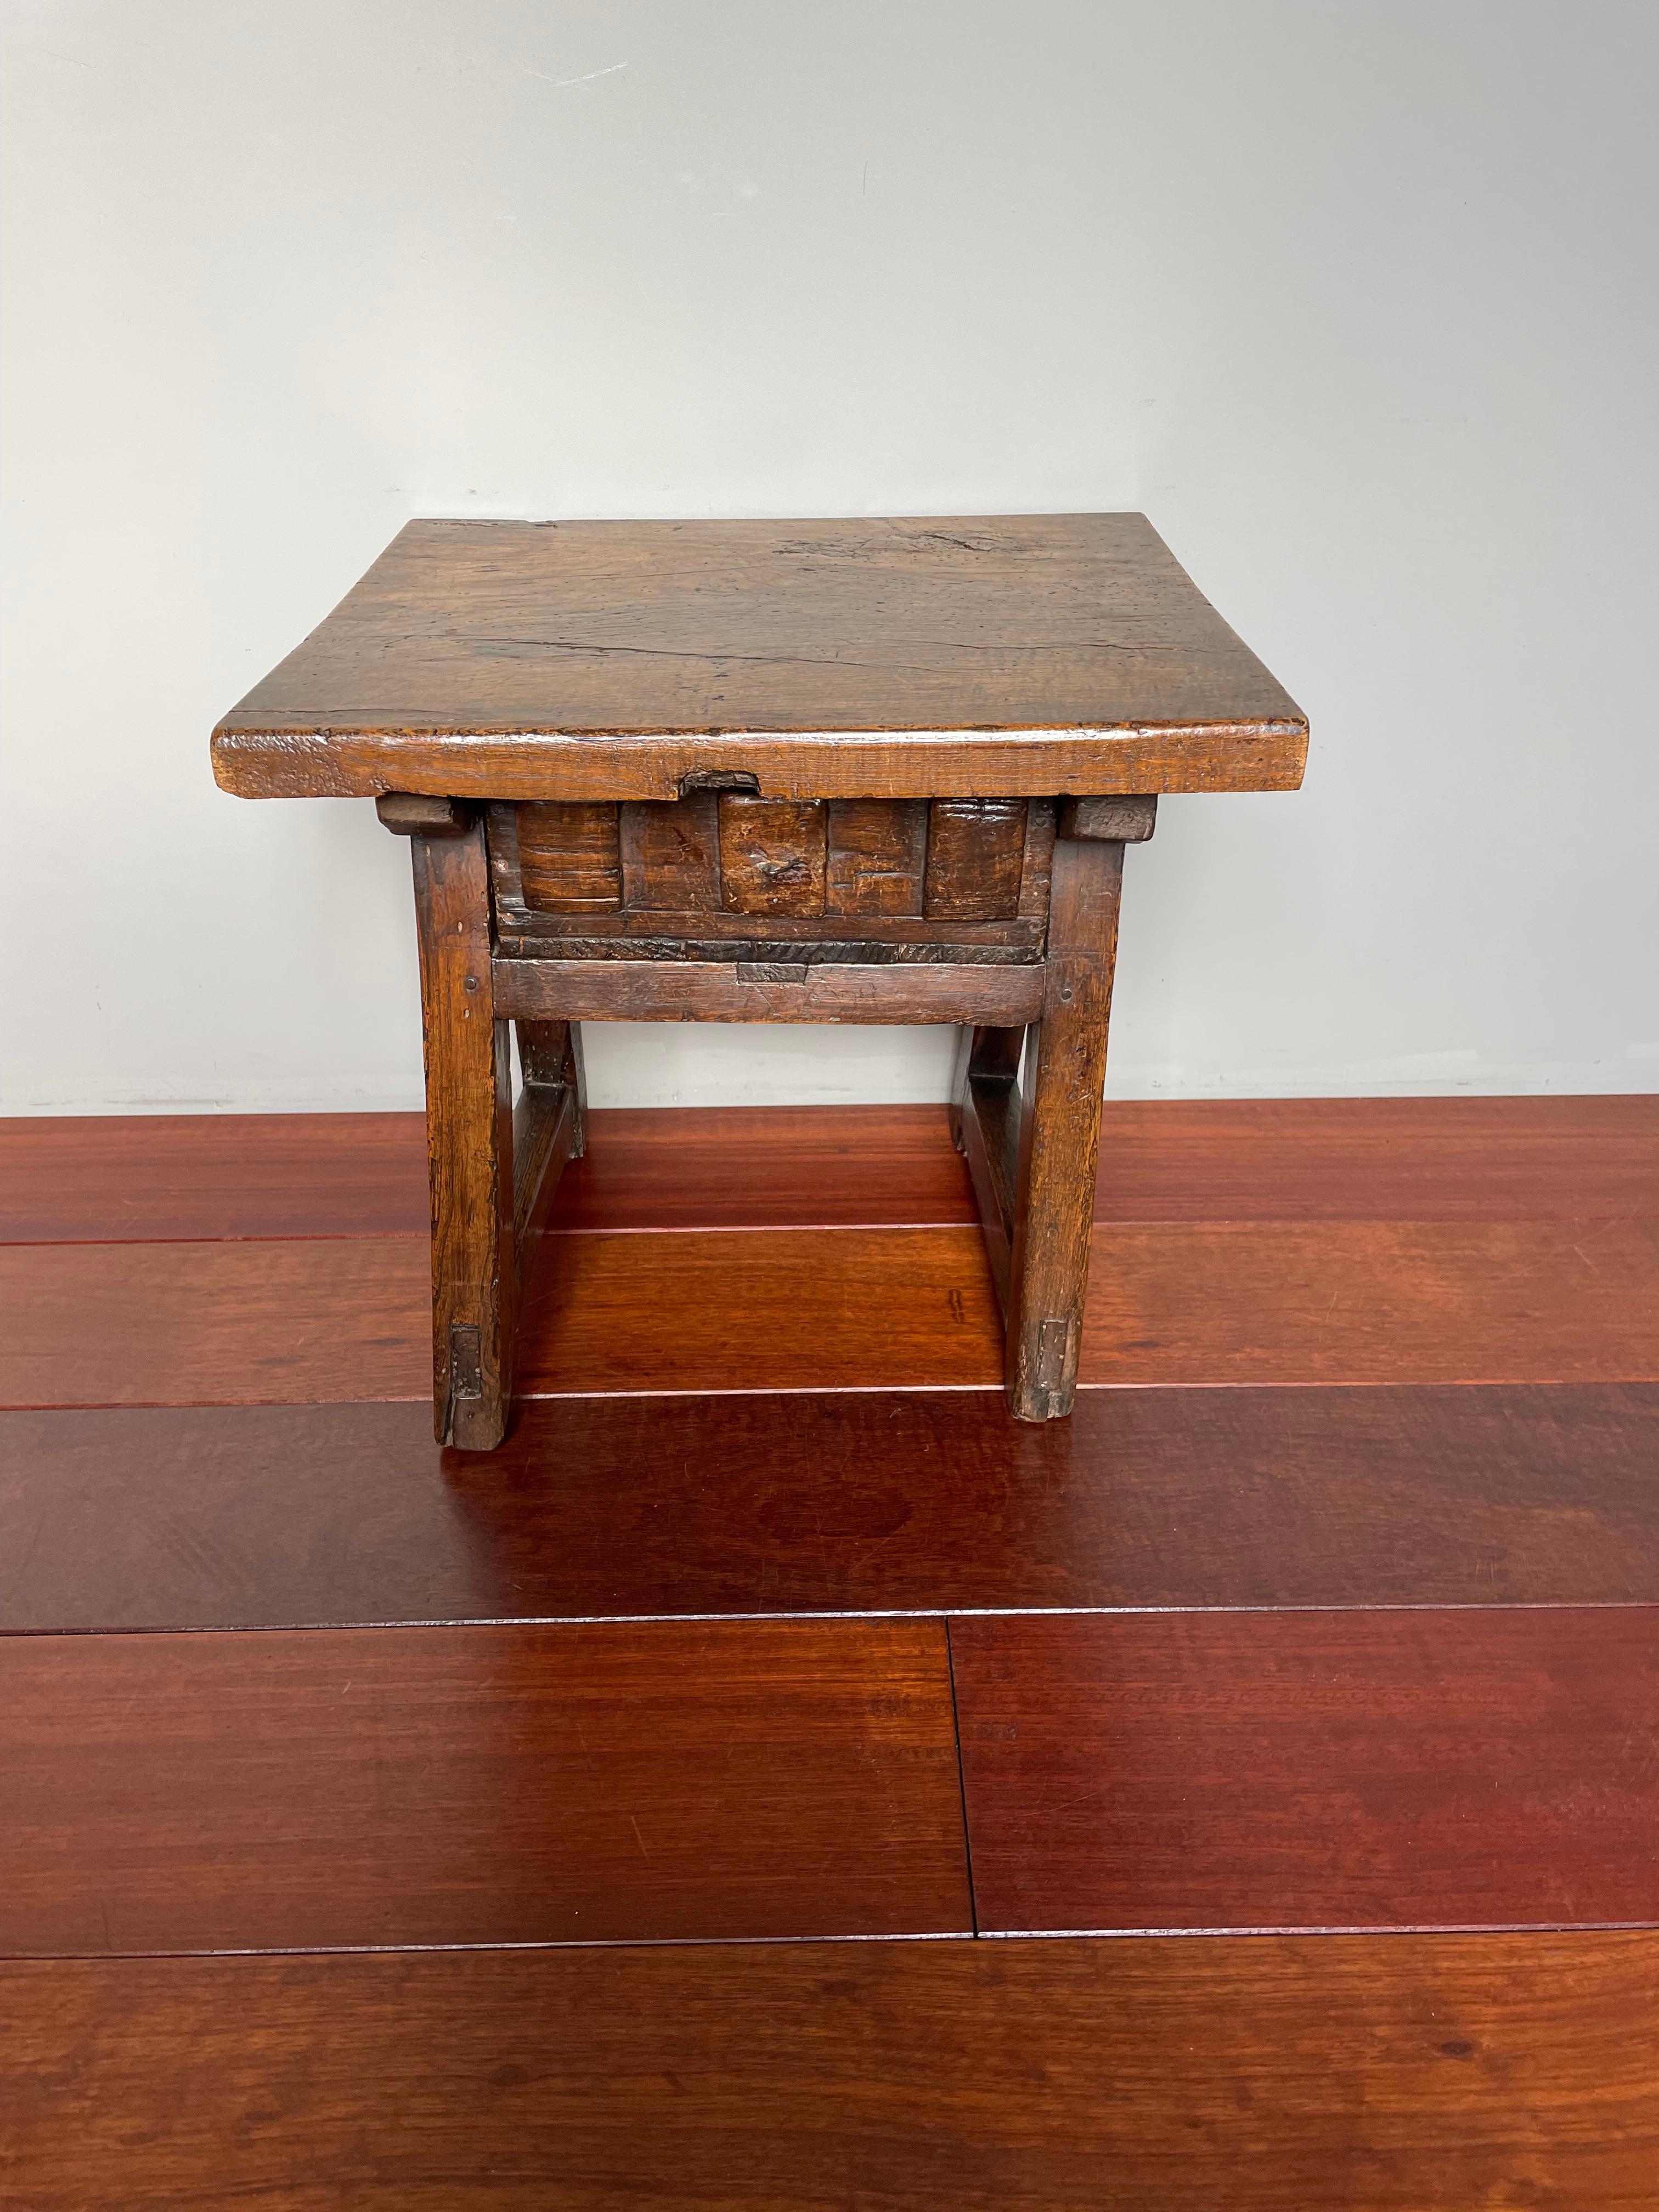 Antique & Rustic Early 1800s Wooden Spanish Countryside Pay Table with Drawer For Sale 8